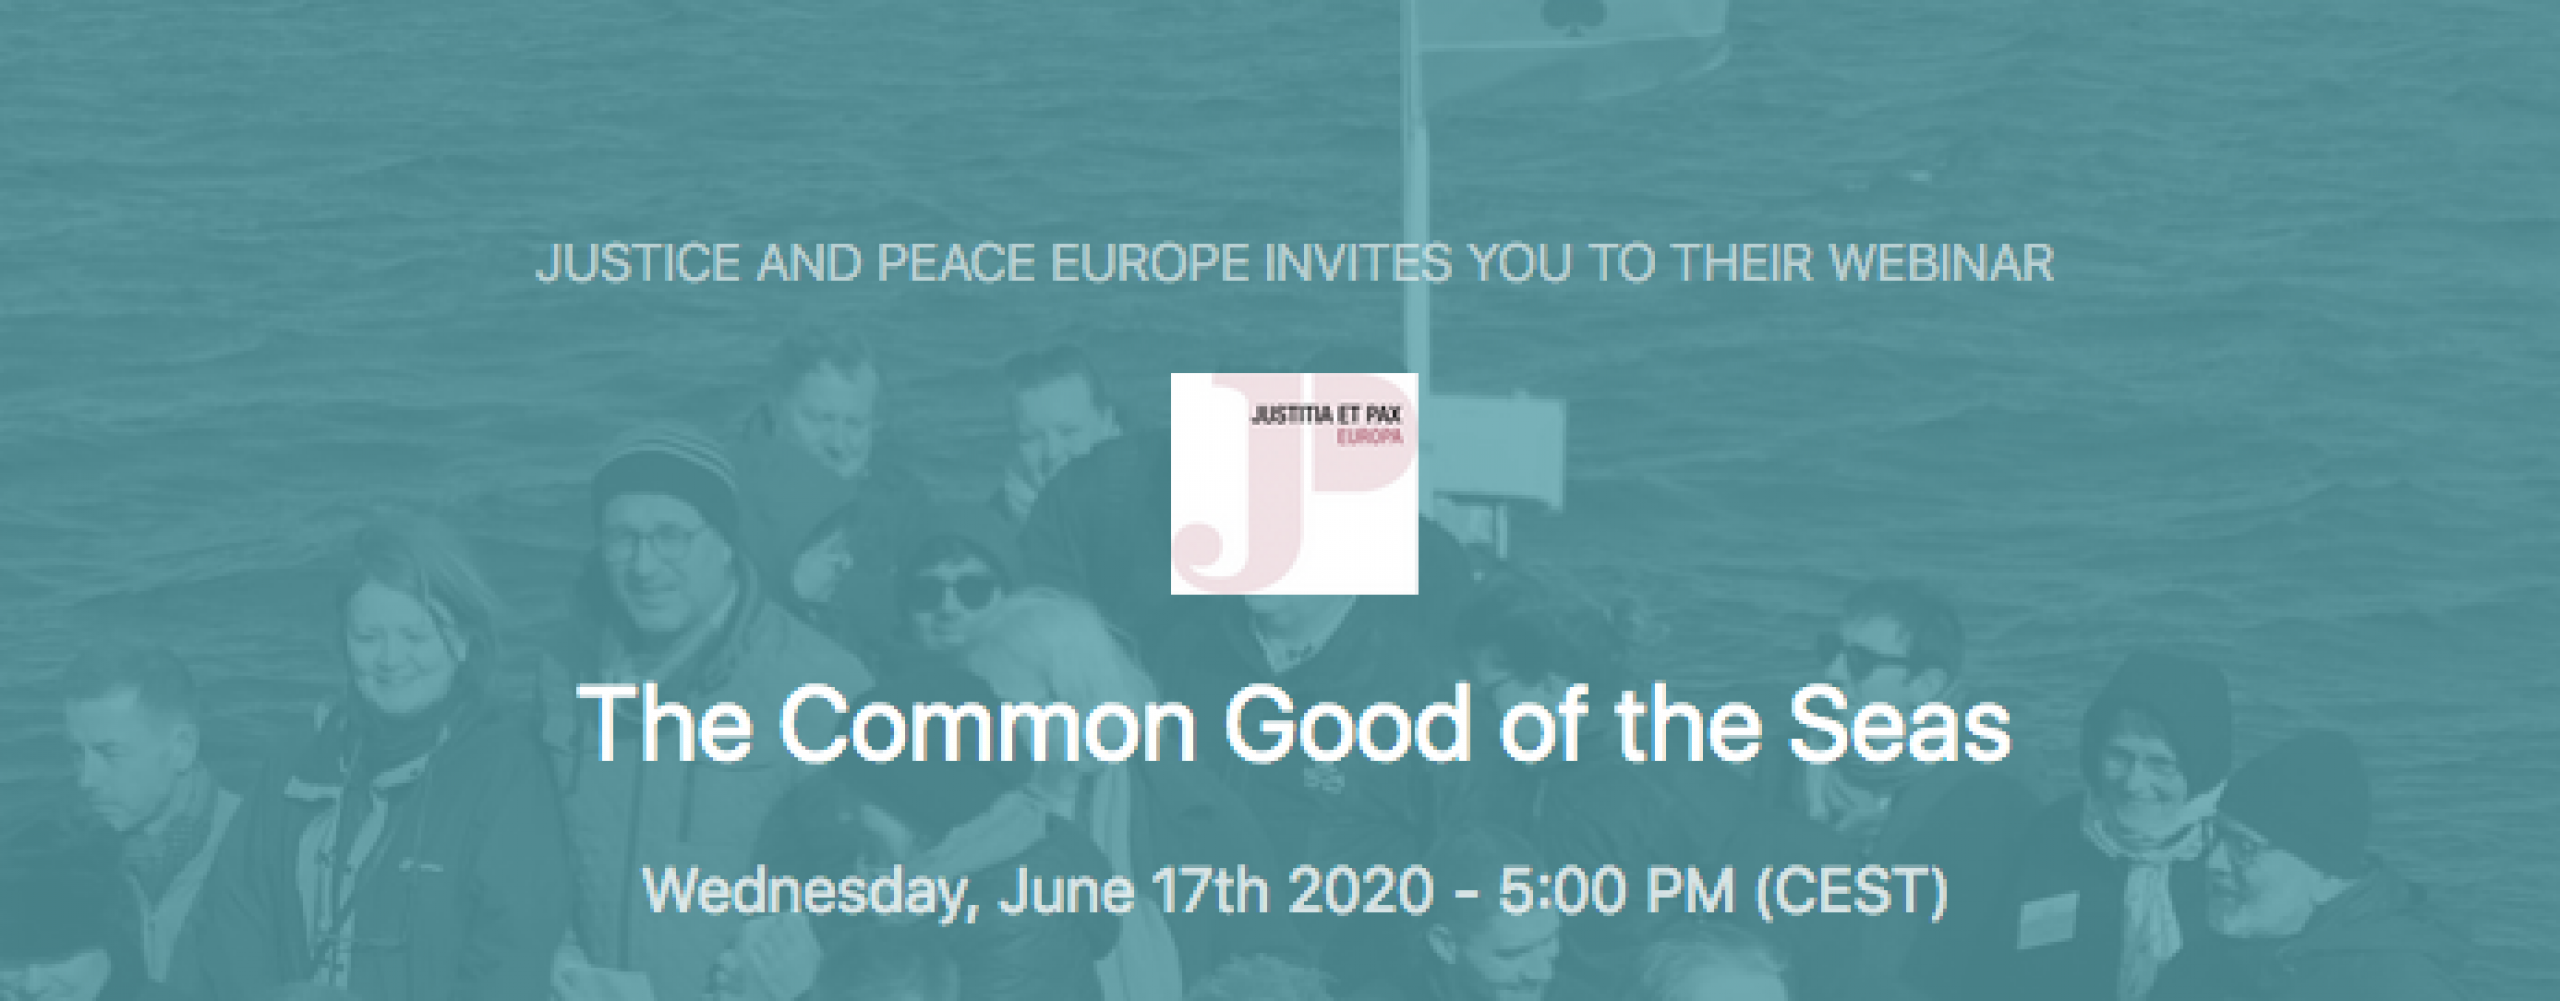 Justice & Peace Europe Webinar on the "Common Good of the Seas"